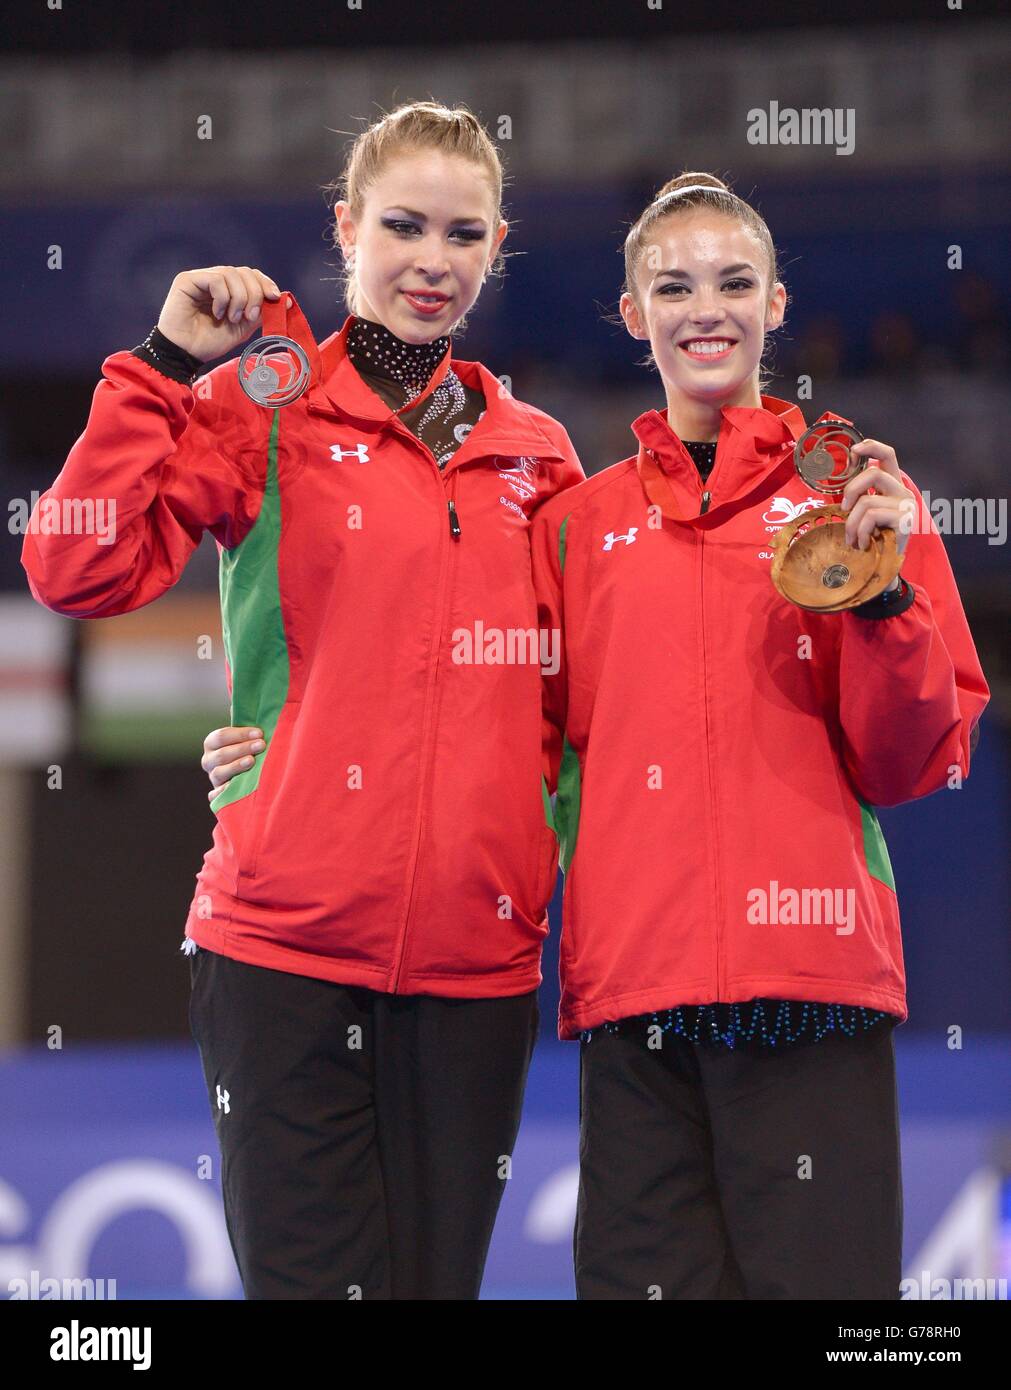 Silver medal winner Wales' Francesca Jones (left) and bronze medal winner Wales' Laura Halford with their medals after the Rhythmic Gymnastics Individual All Round Final at the SSE Hydro during the 2014 Commonwealth Games in Glasgow. Stock Photo